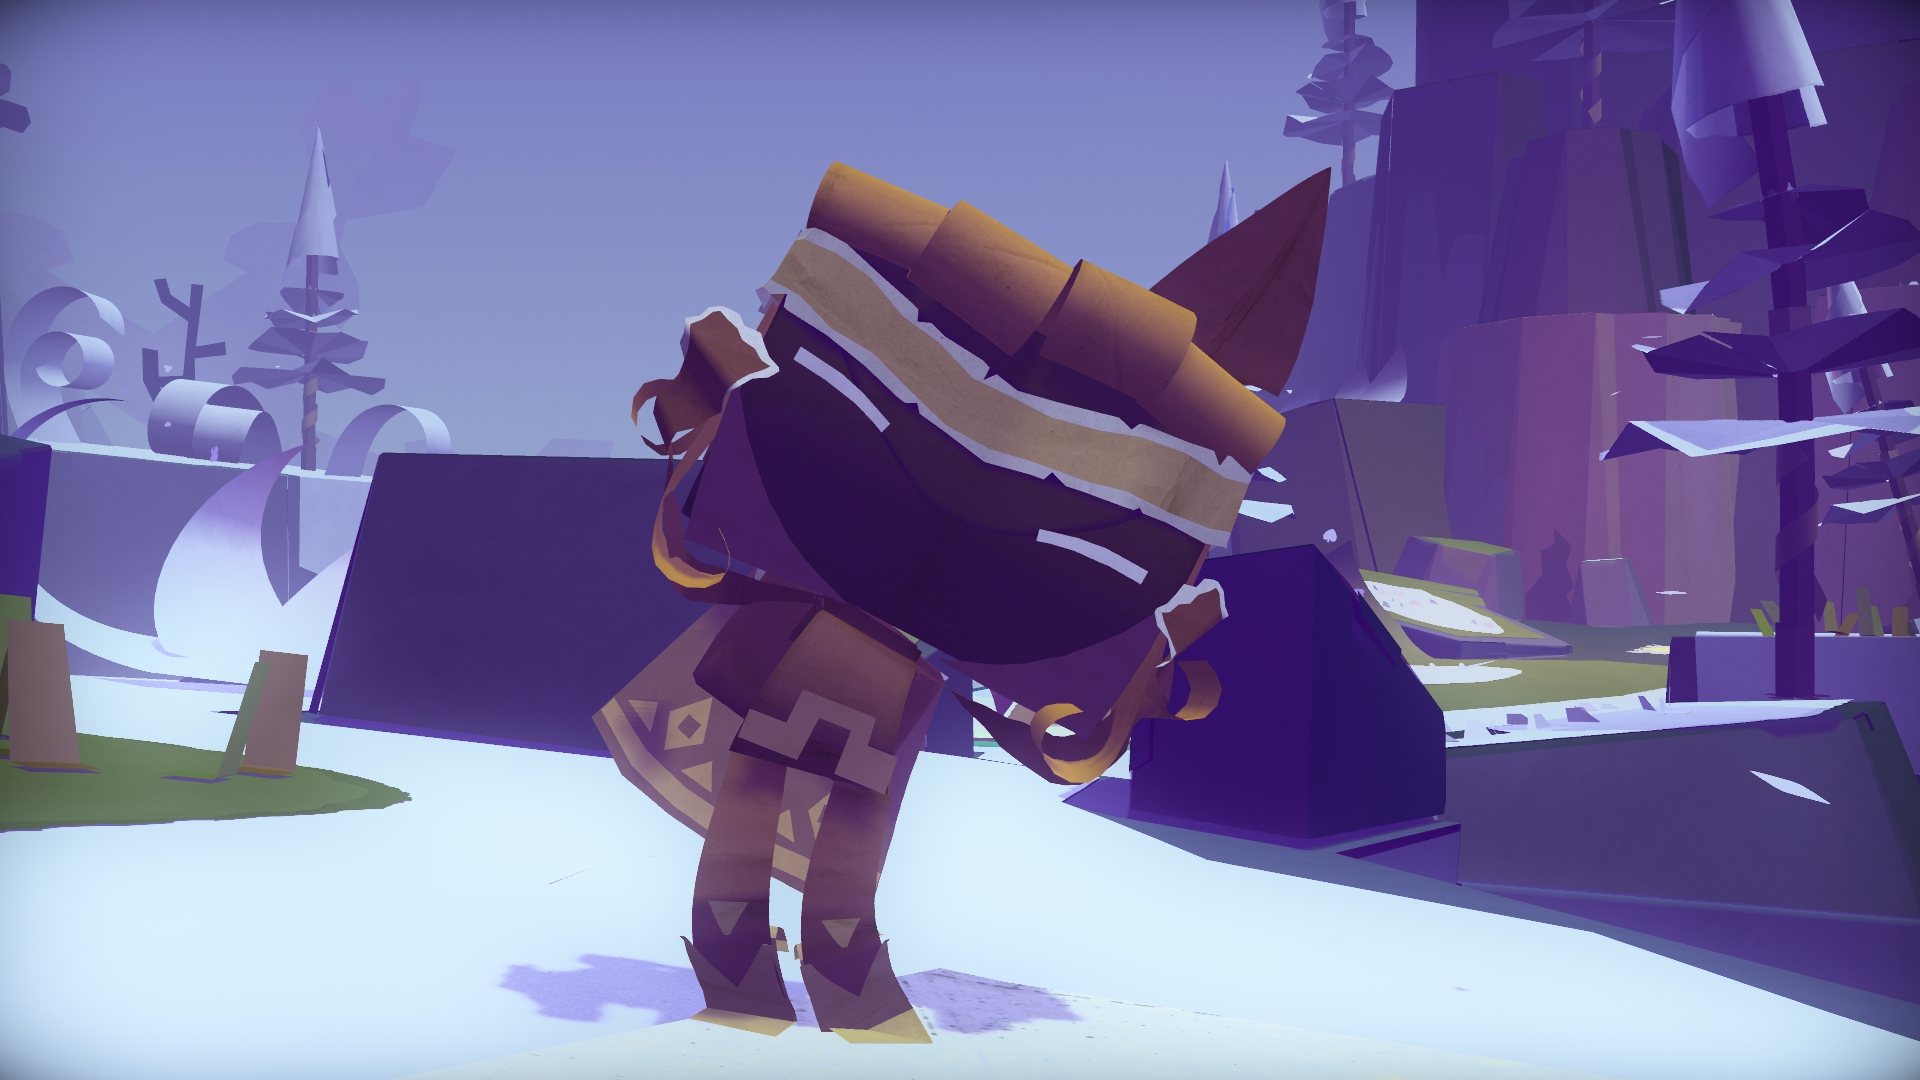 Tearaway Unfolded Release Date Confirmed for September